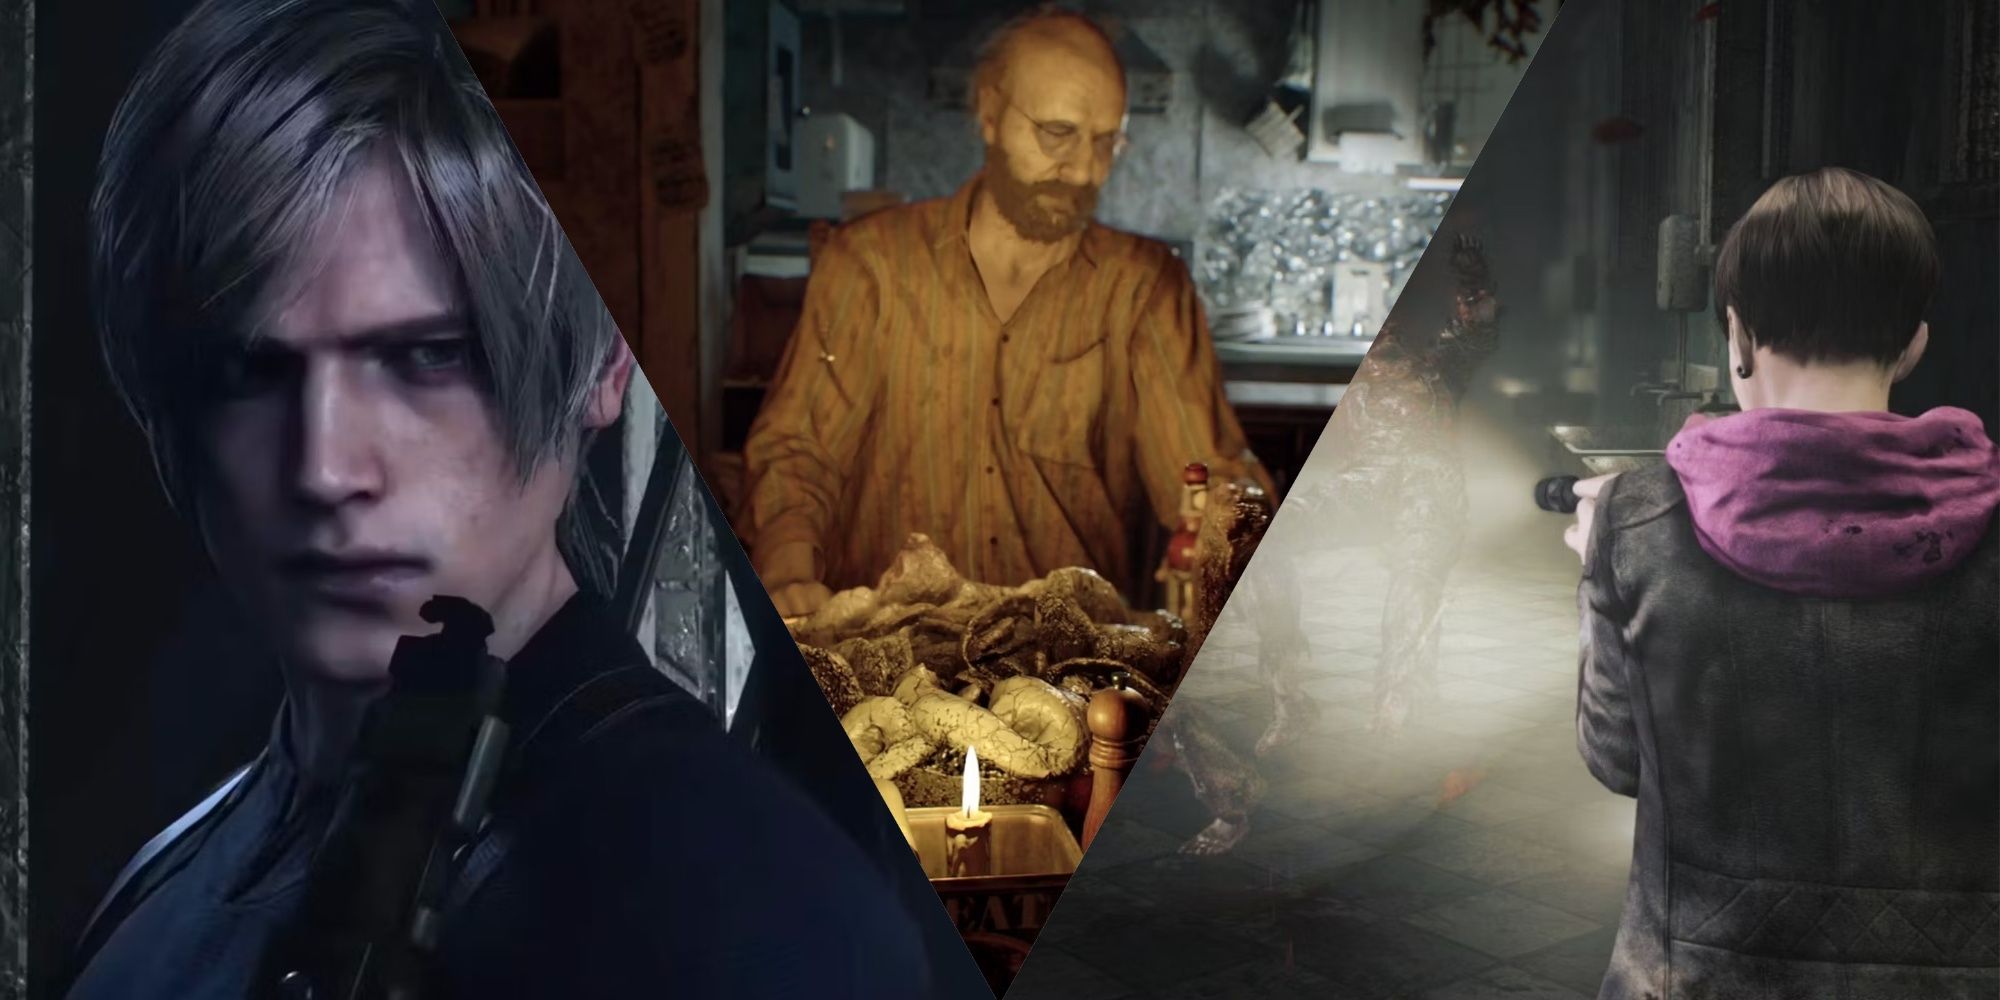 Resident Evil 4 Remake Leon with his pistol held close to his face, Jack baker at the dinner table in Resident Evil 7, and a character aiming a gun and flashlight in Resident Evil Revelations, left to right